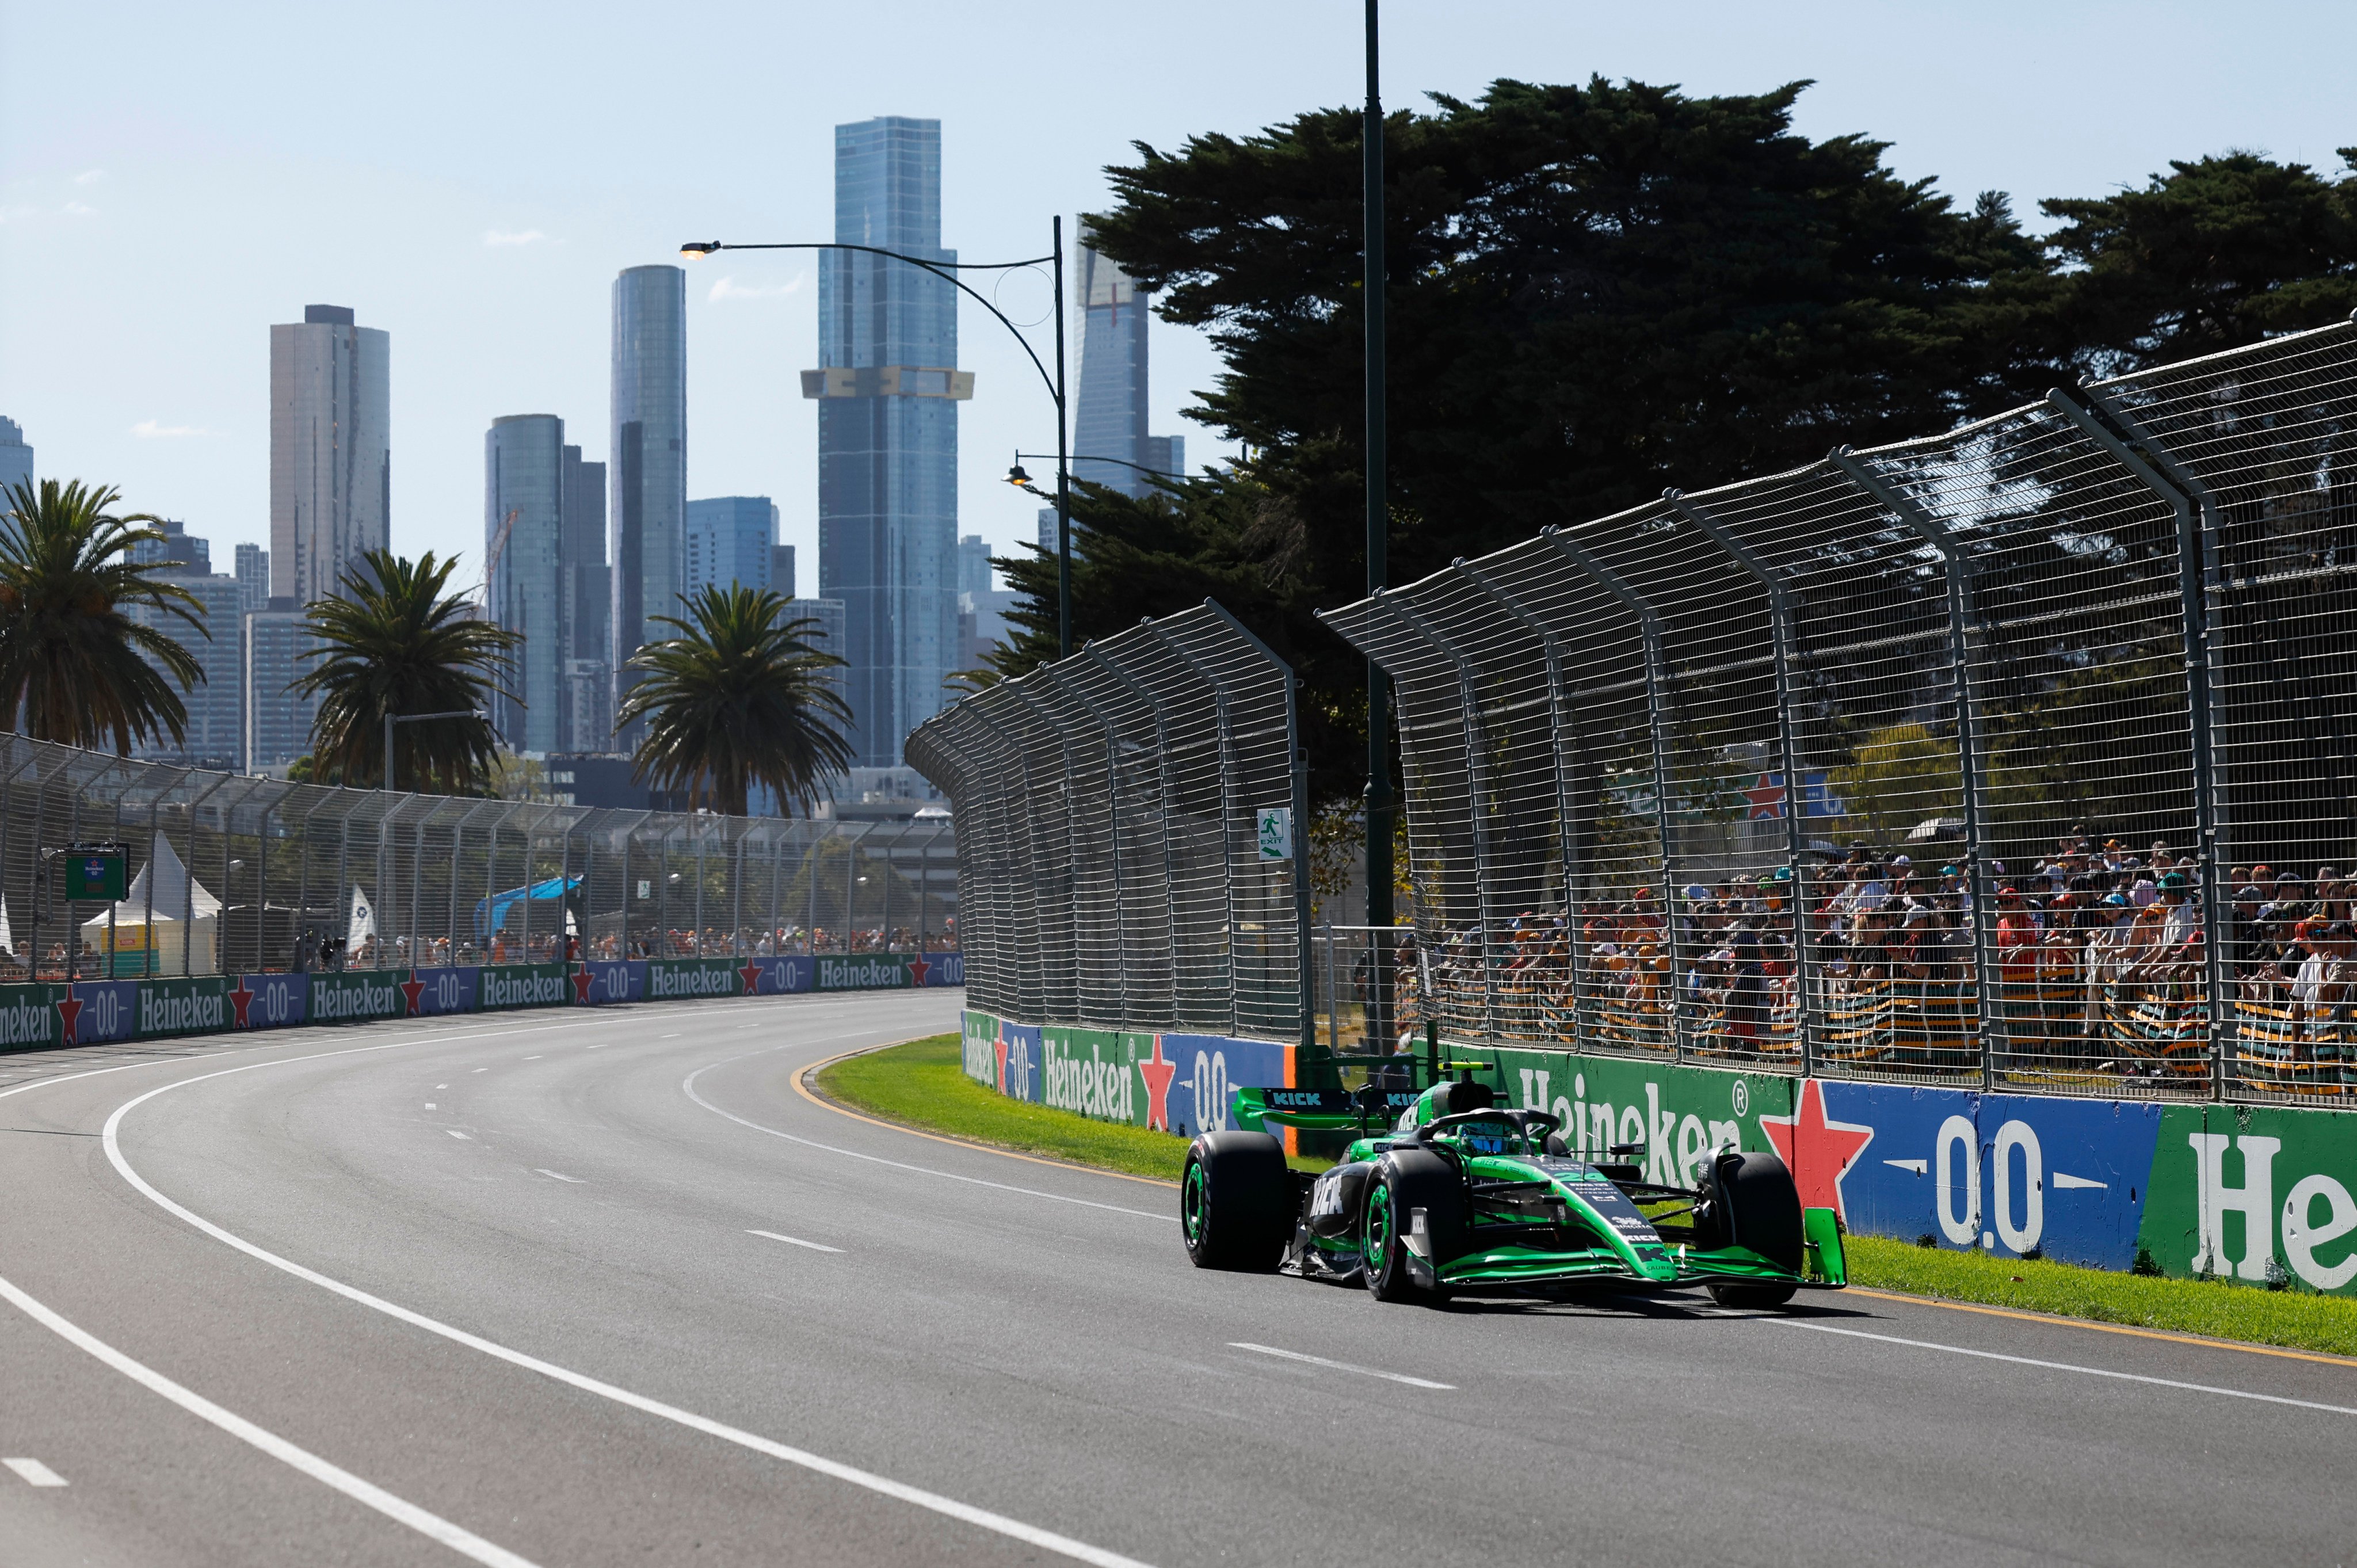 Kick Sauber’s Zhou Guanyu of China races in this year’s Australian Grand Prix at Albert Park in Melbourne. Photo: Xinhua